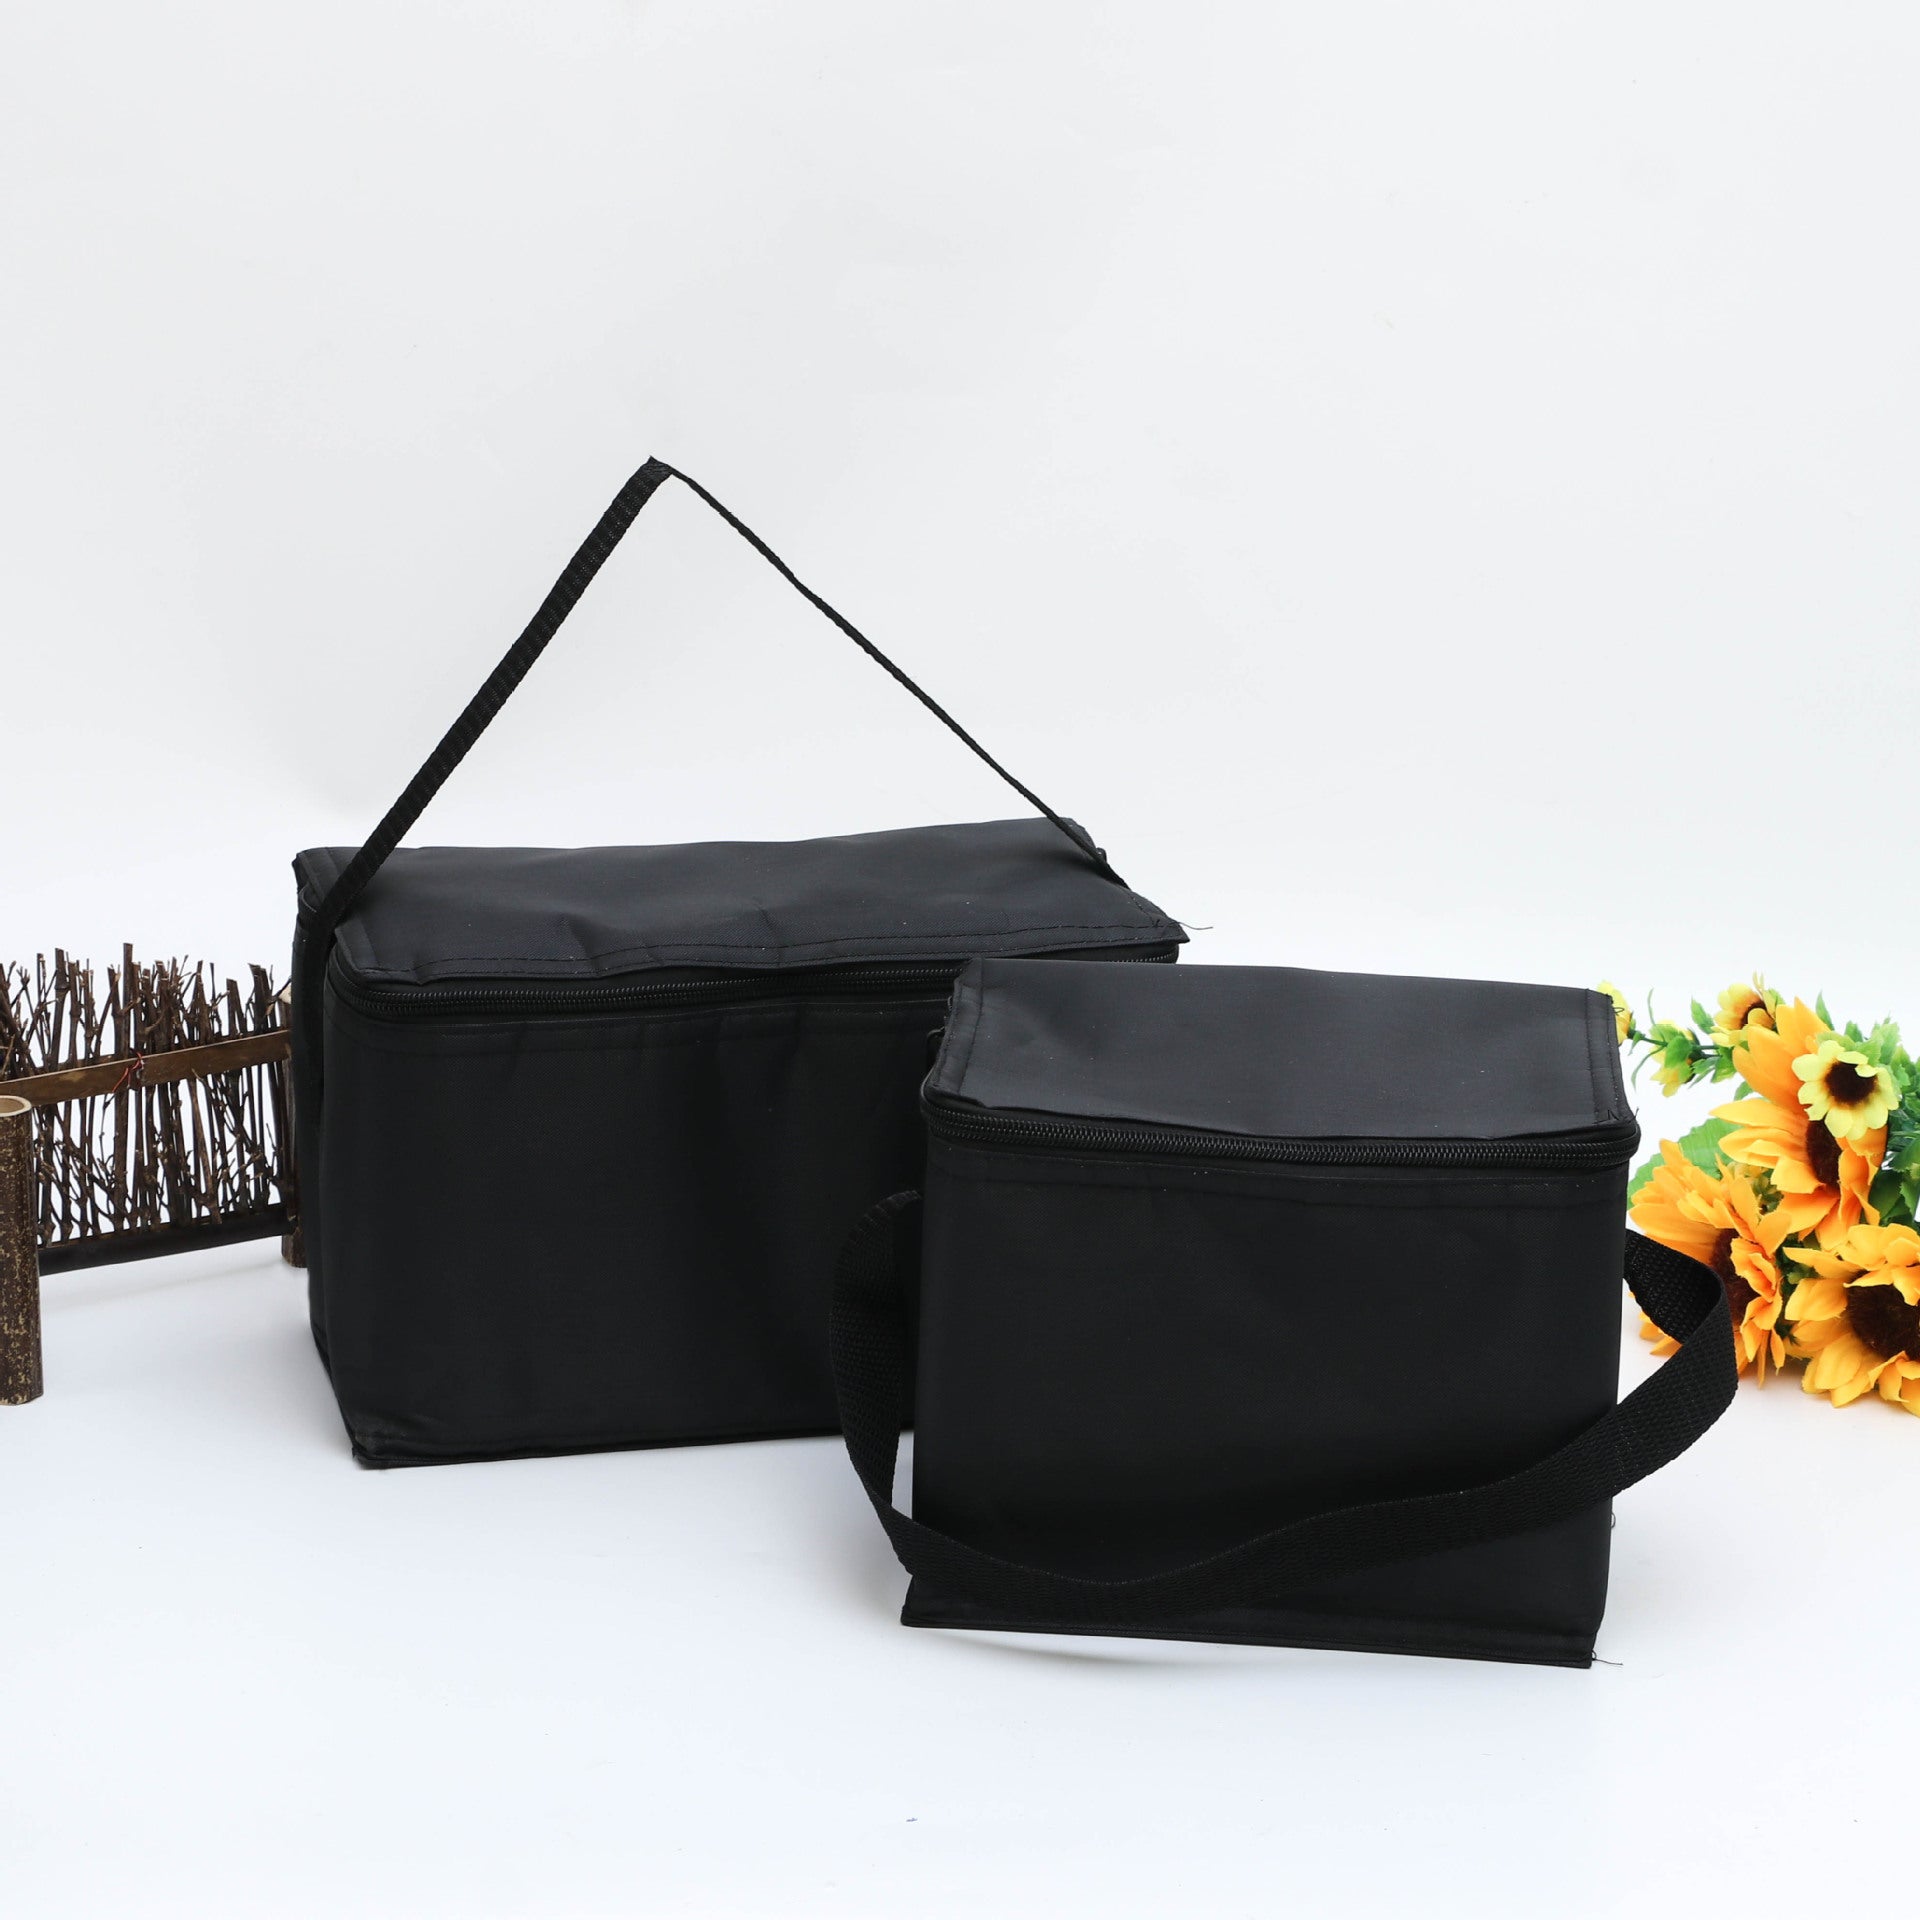 Black Insulated Cooler Bag on a gray surface